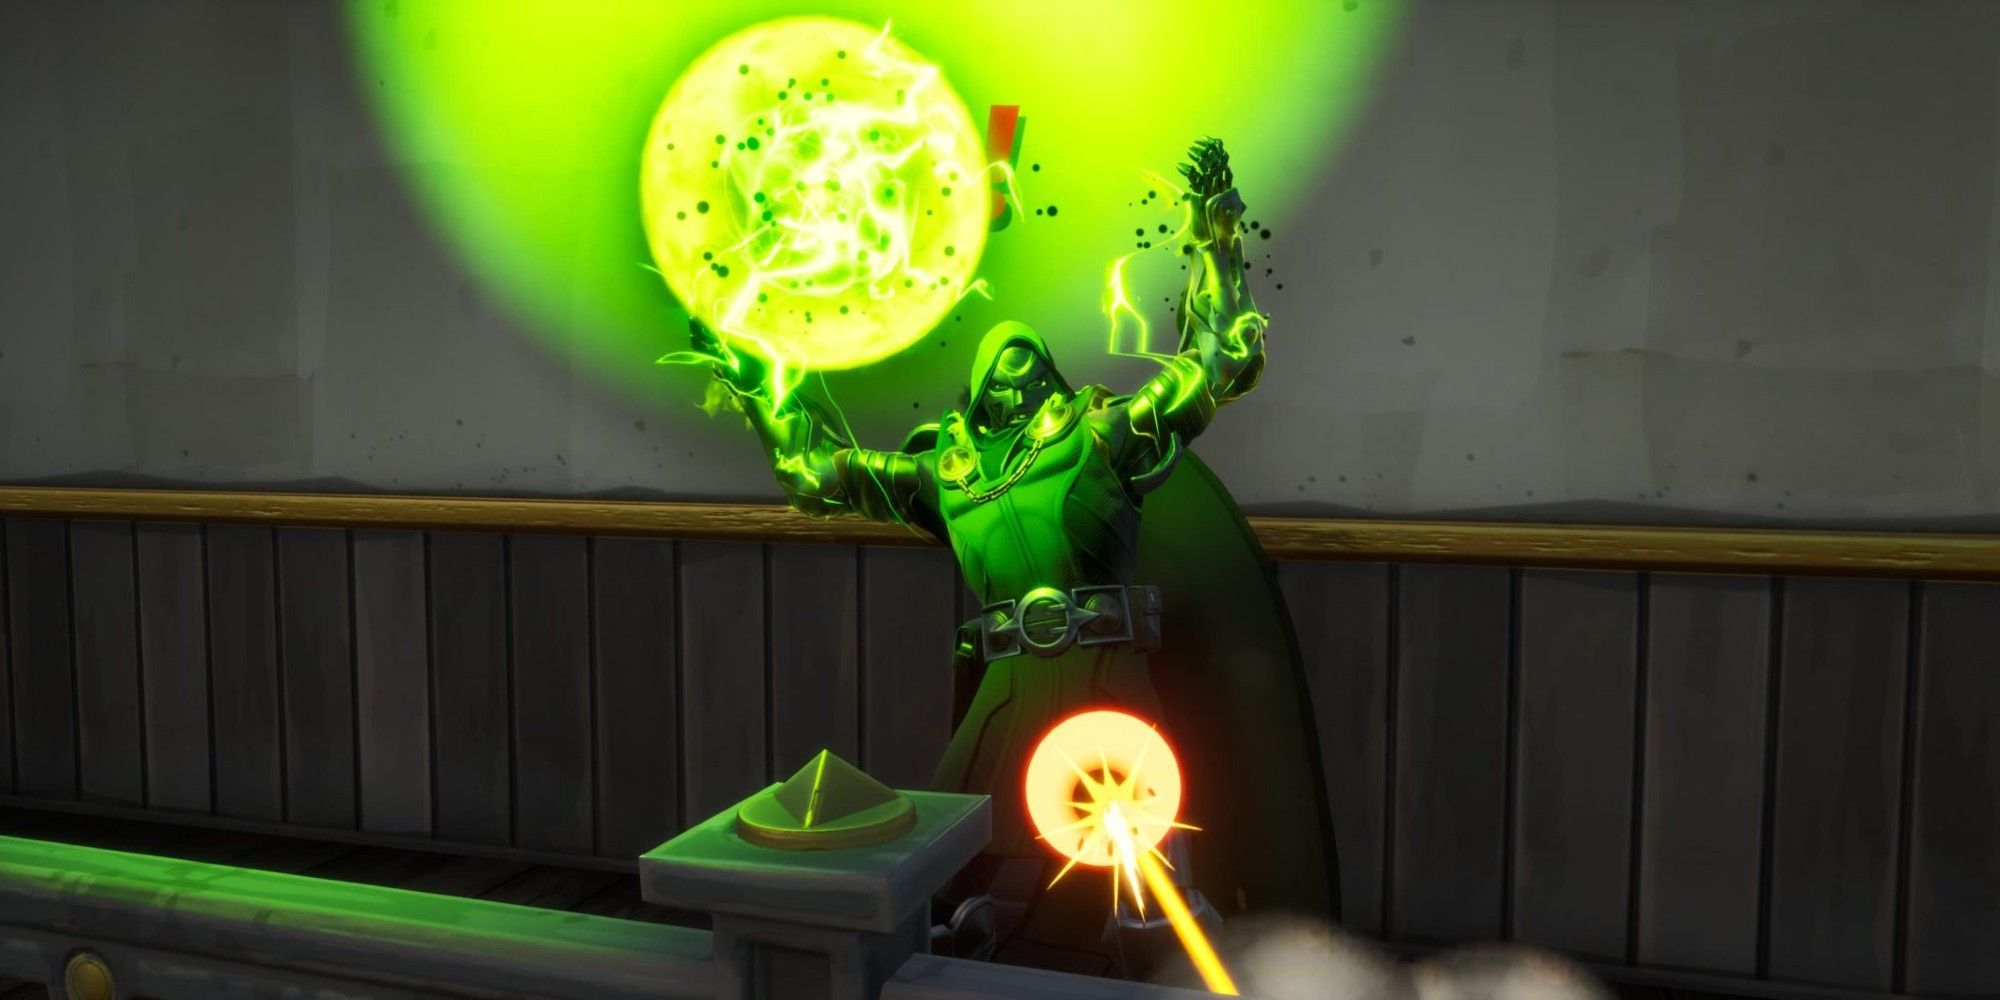 Dr. Doom has two Mythic weapons in his possession during a match in Fortnite Season 4